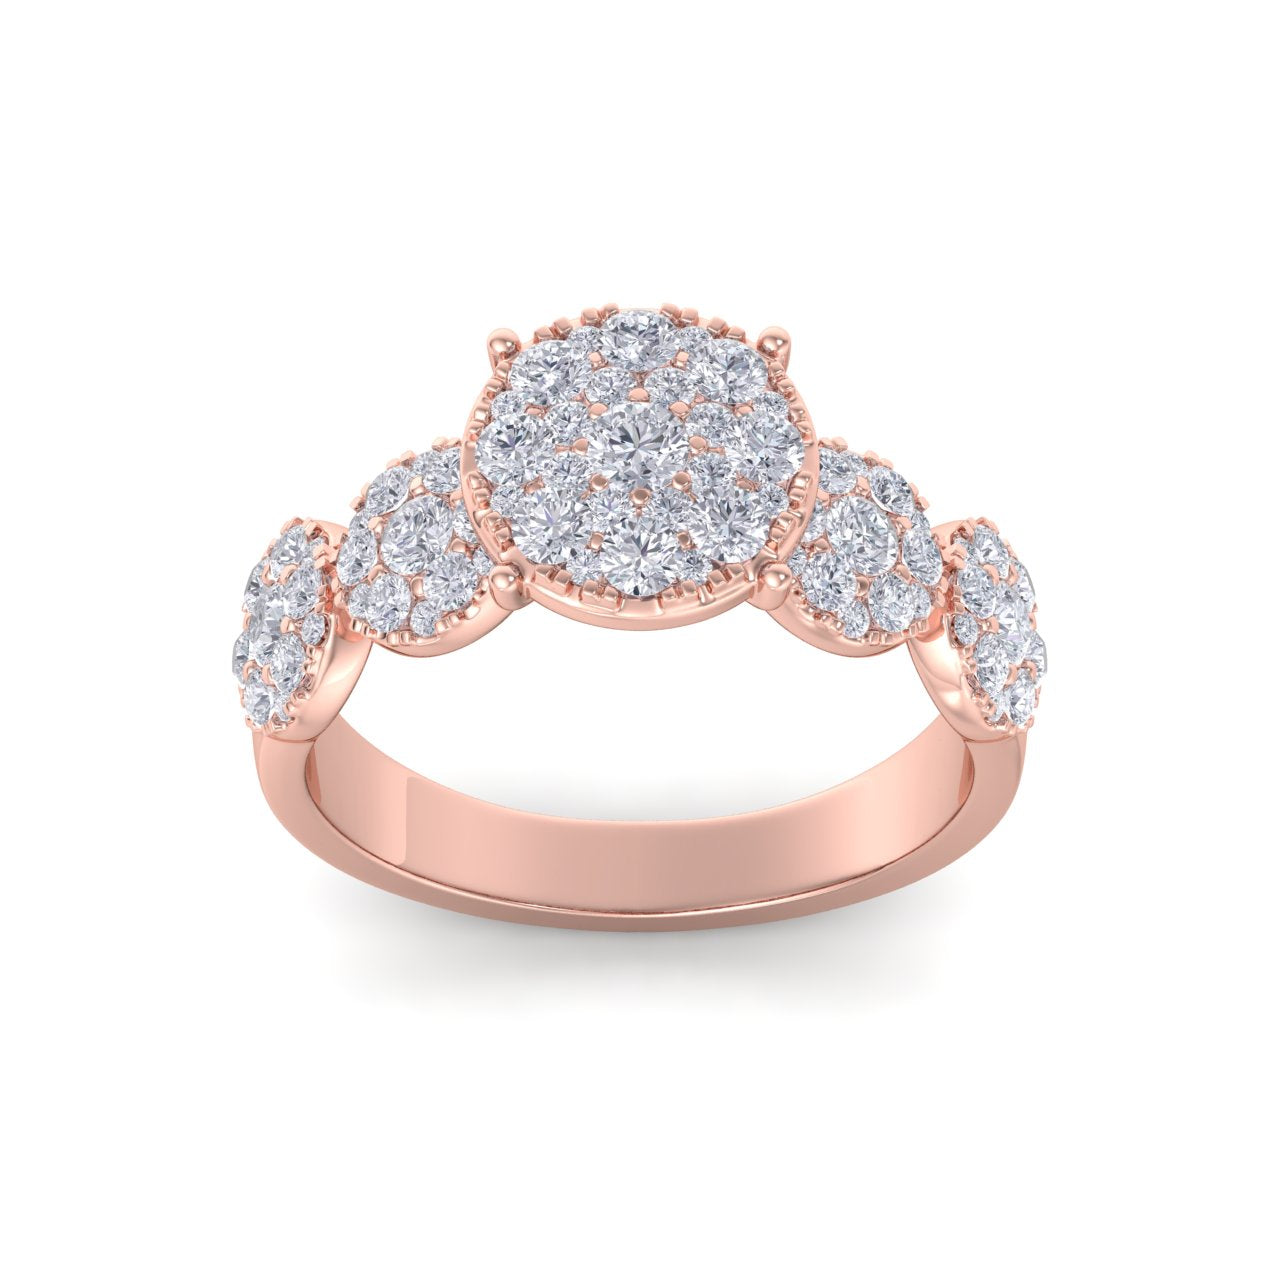 Bridal ring in rose gold with white diamonds of 2.29 ct in weight